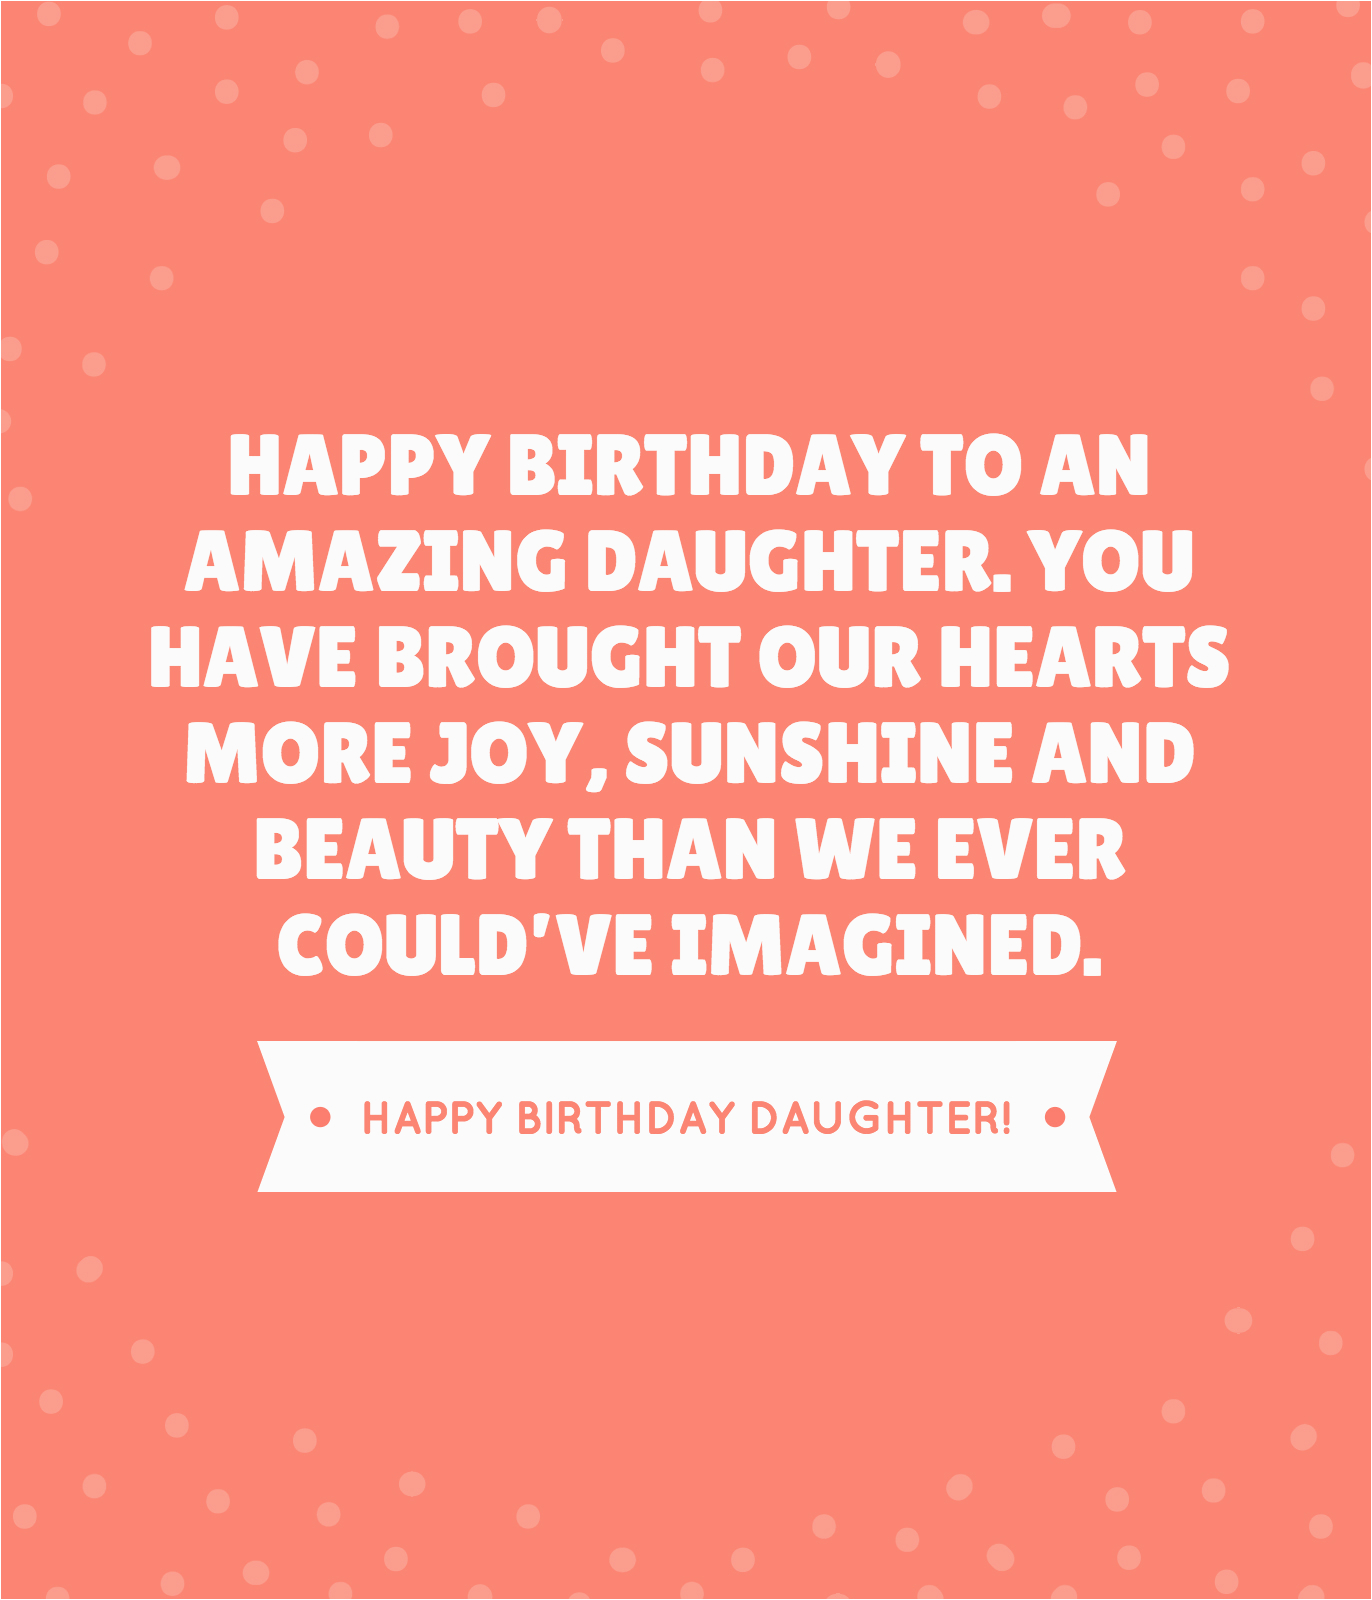 Happy Birthday Special Daughter Quotes 35 Beautiful Ways to Say Happy Birthday Daughter Unique